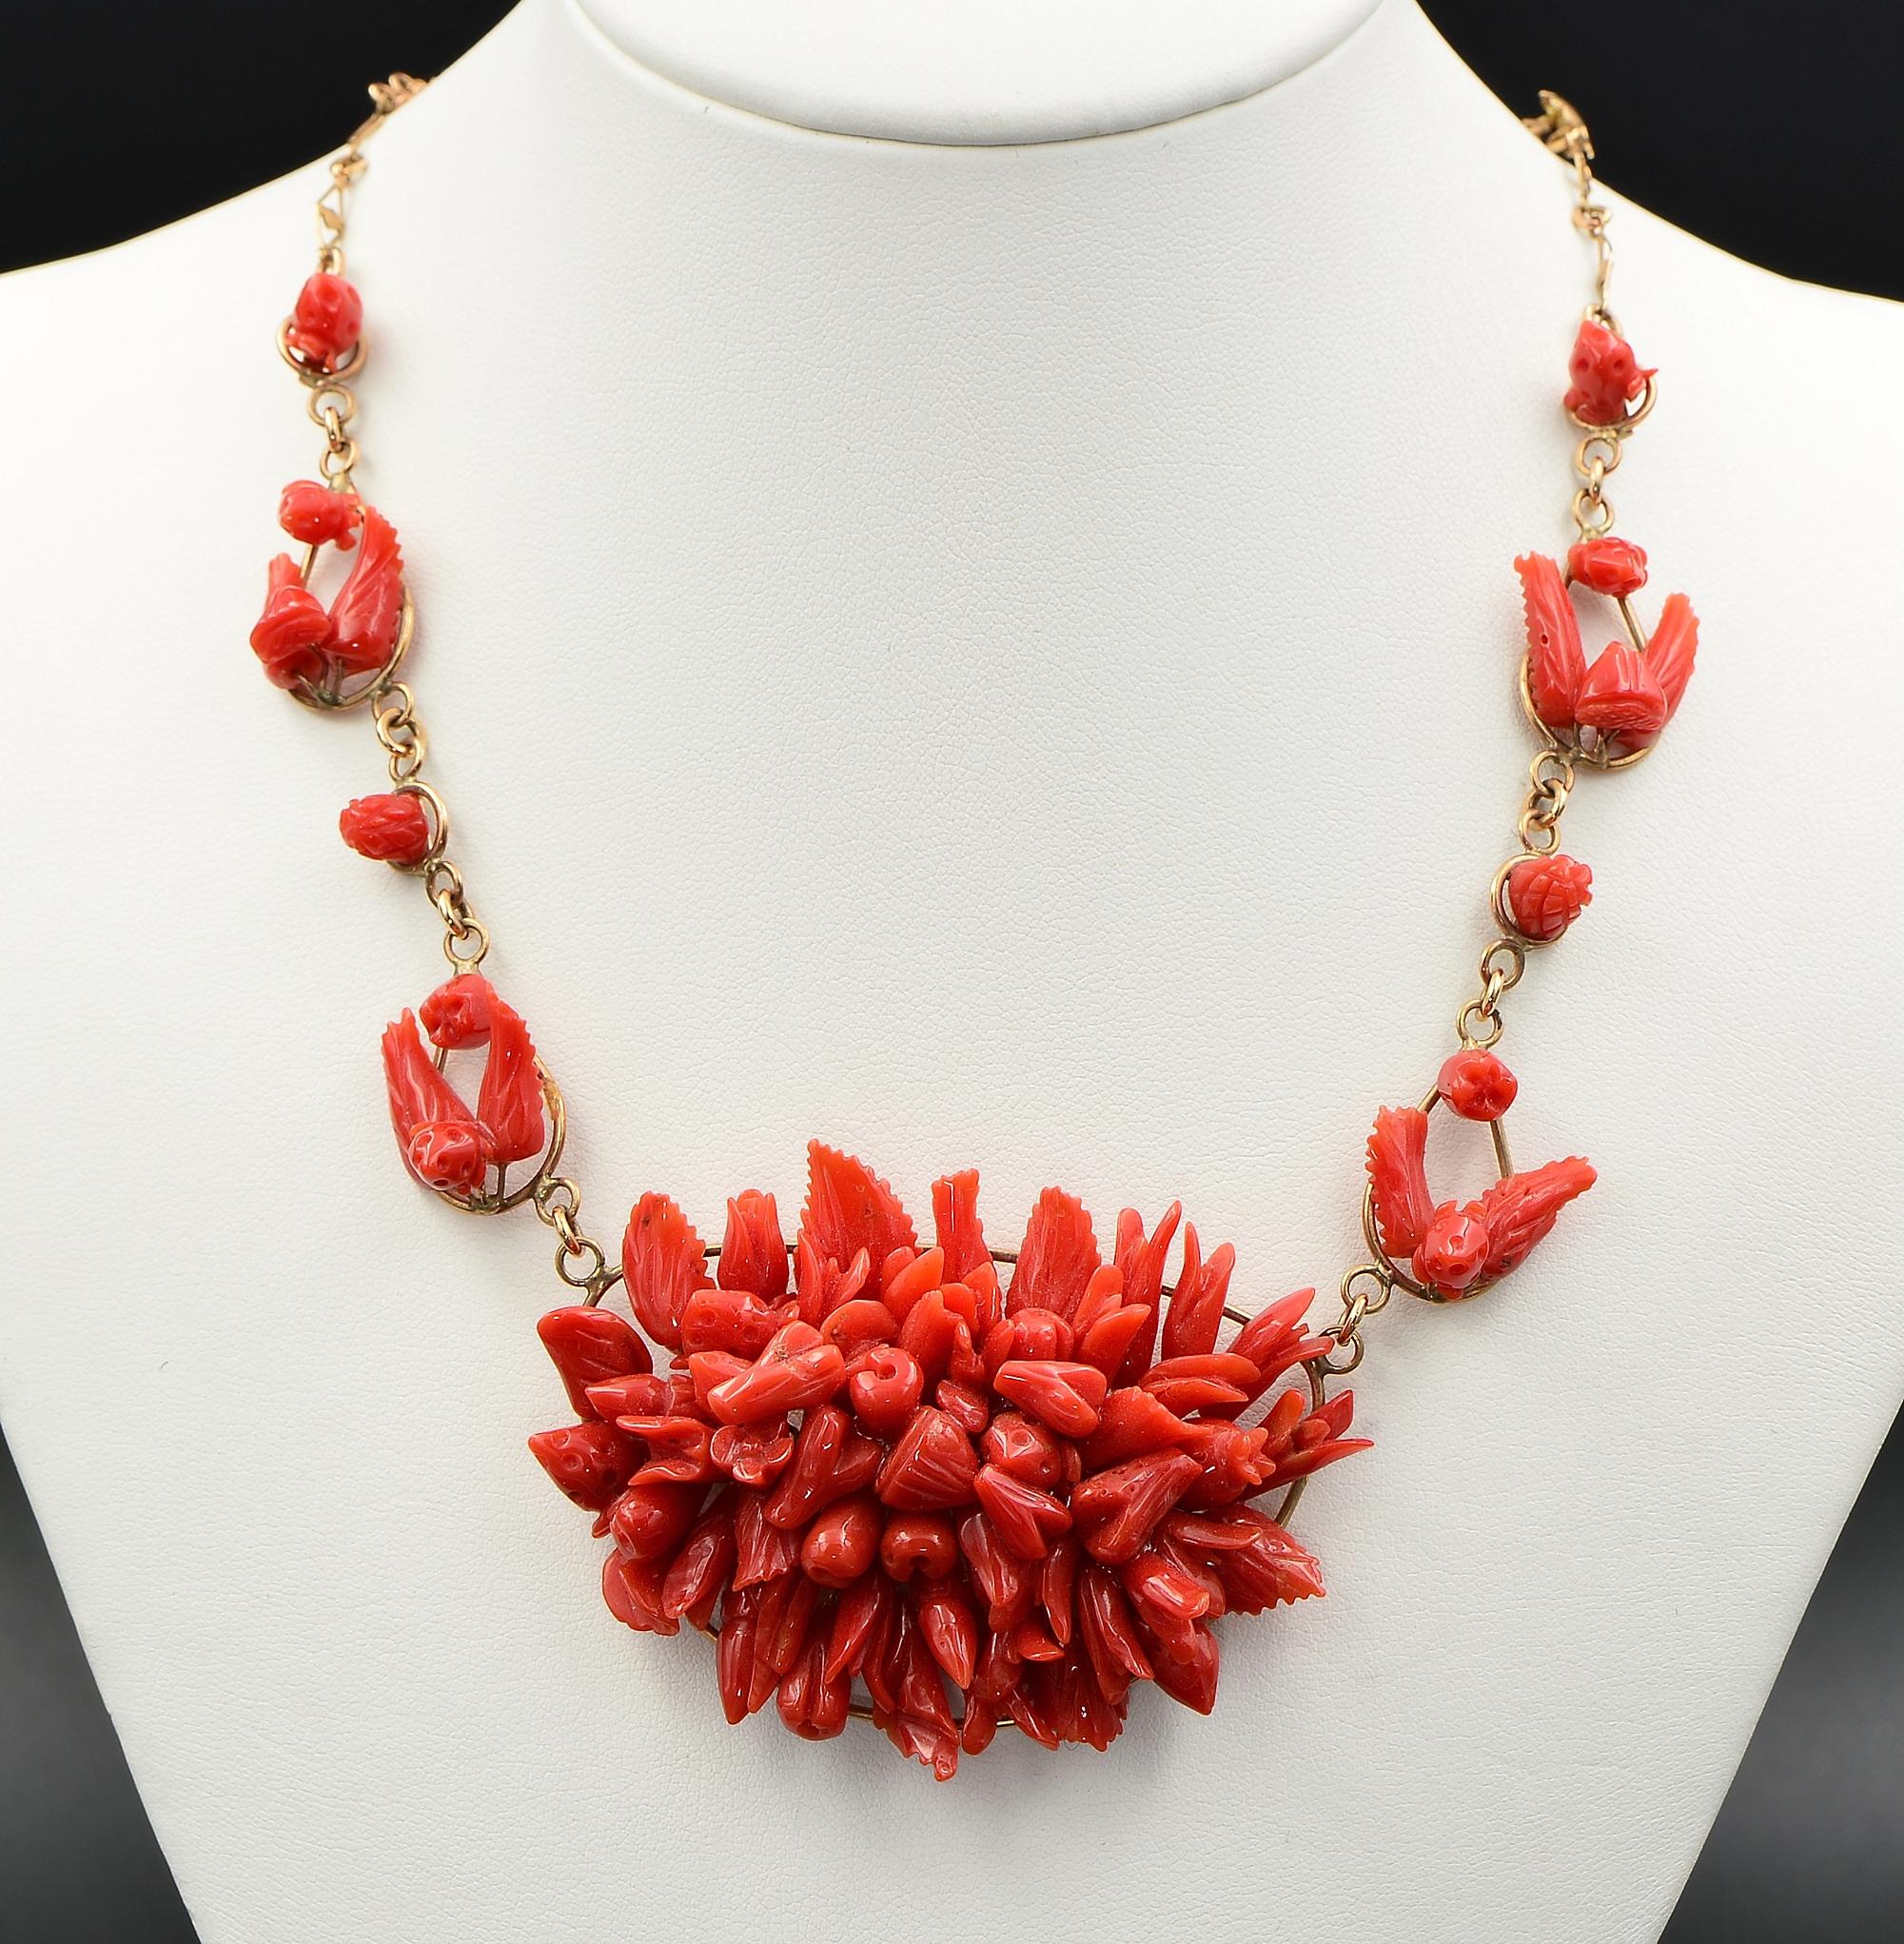 Coral Art
Antique 1920 ca, artistry made Tutti Frutti Coral full necklace
A centre wide panel of Tutti Frutti of attractive red Coral is set in the middle, this is entirely hand worked of Natural Red Coral, hand carved piece by piece in the form of